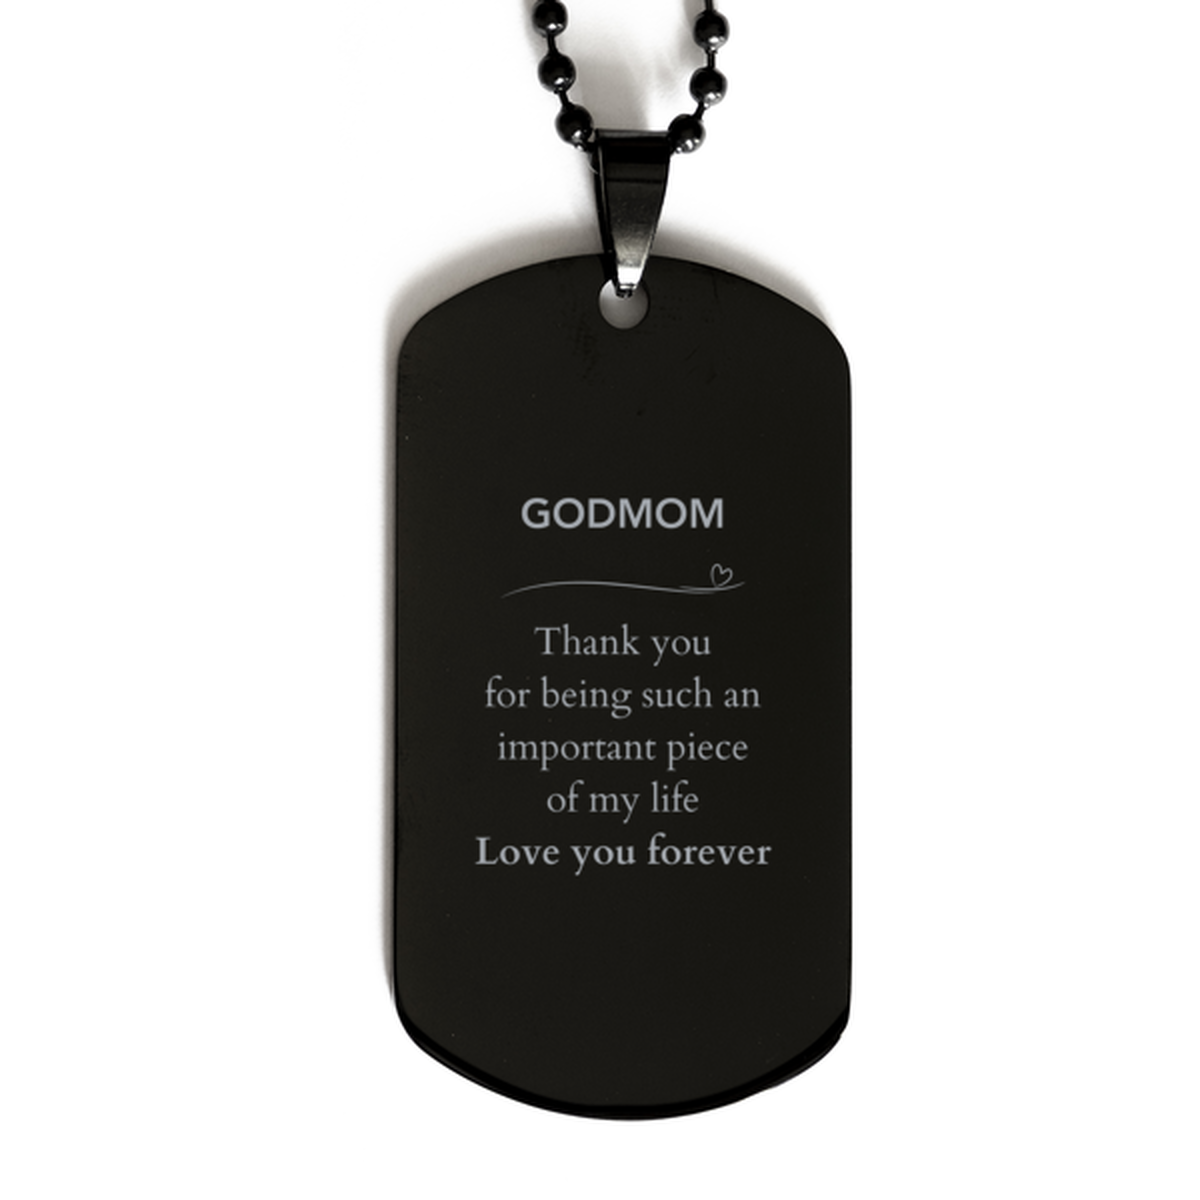 Appropriate Godmom Black Dog Tag Epic Birthday Gifts for Godmom Thank you for being such an important piece of my life Godmom Christmas Mothers Fathers Day